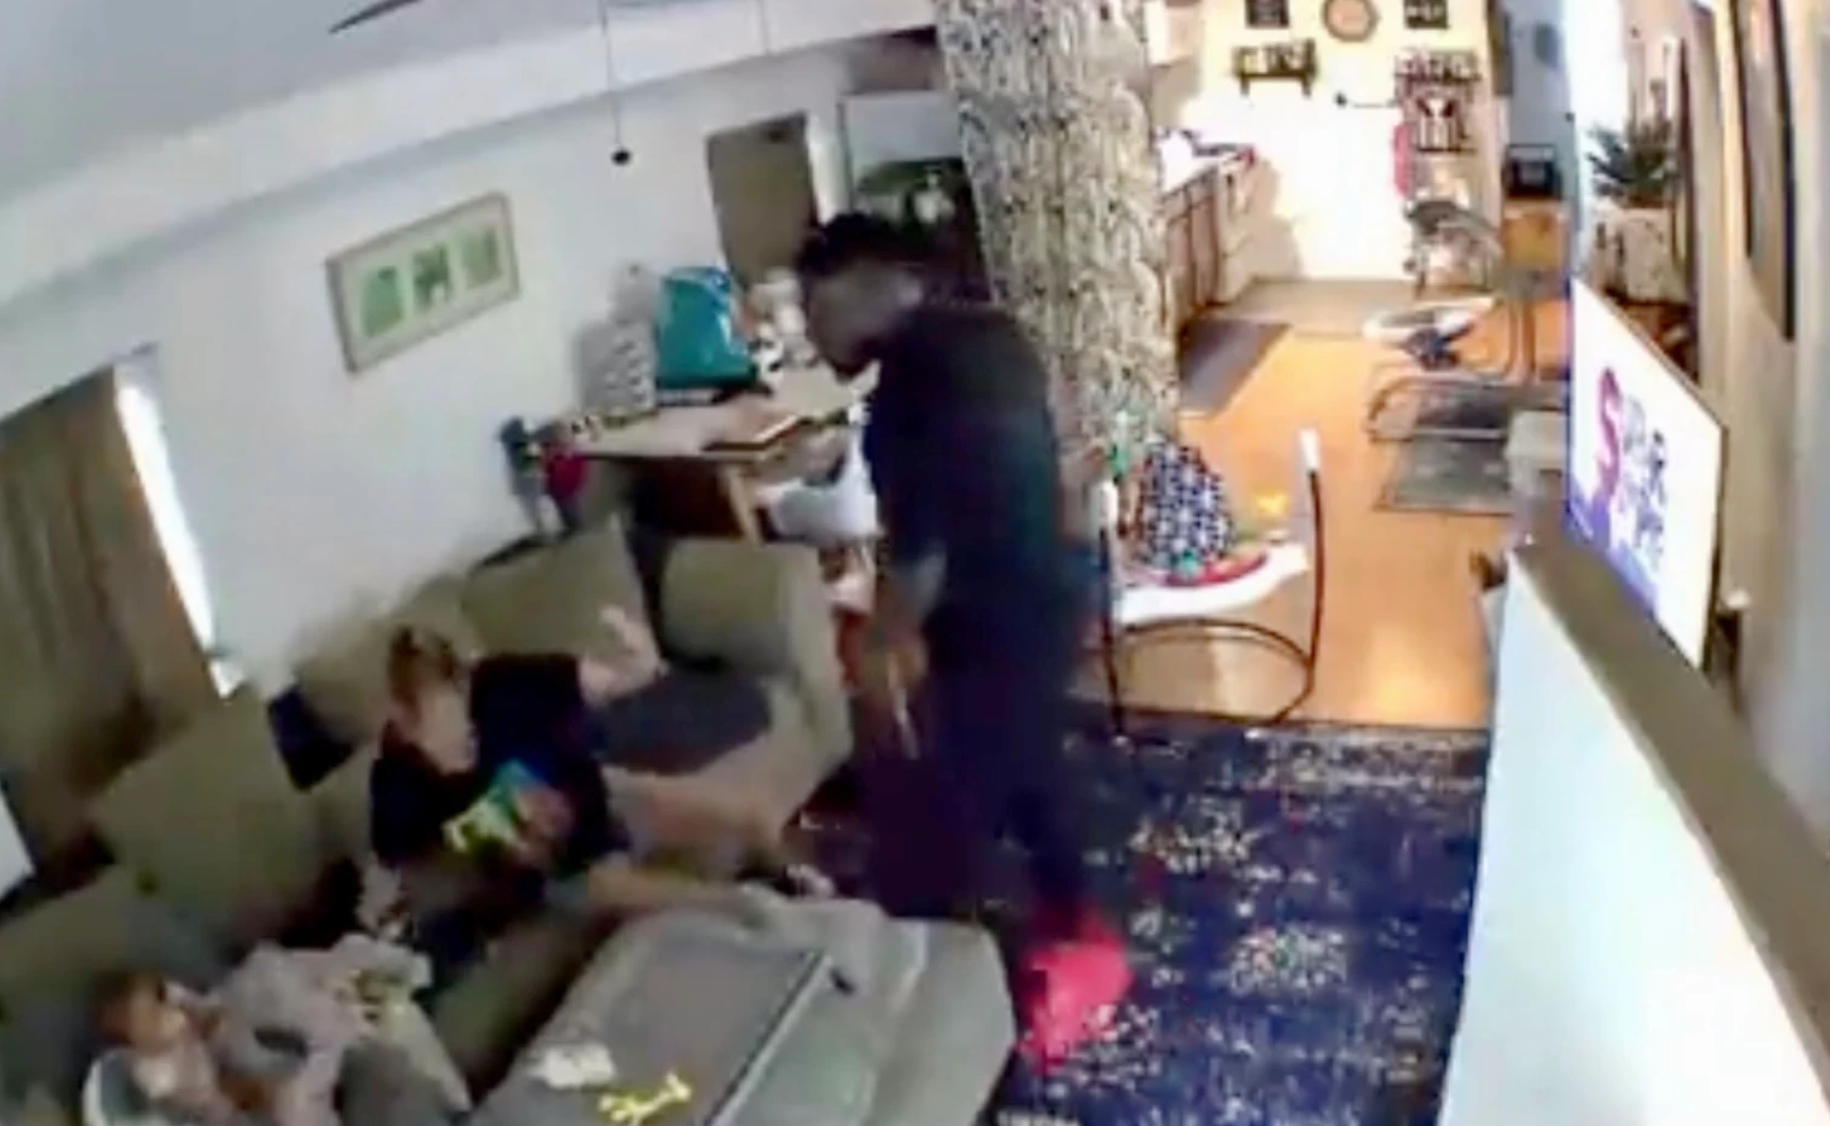 Footage of Zac Stacy showed him attacking his ex-partner